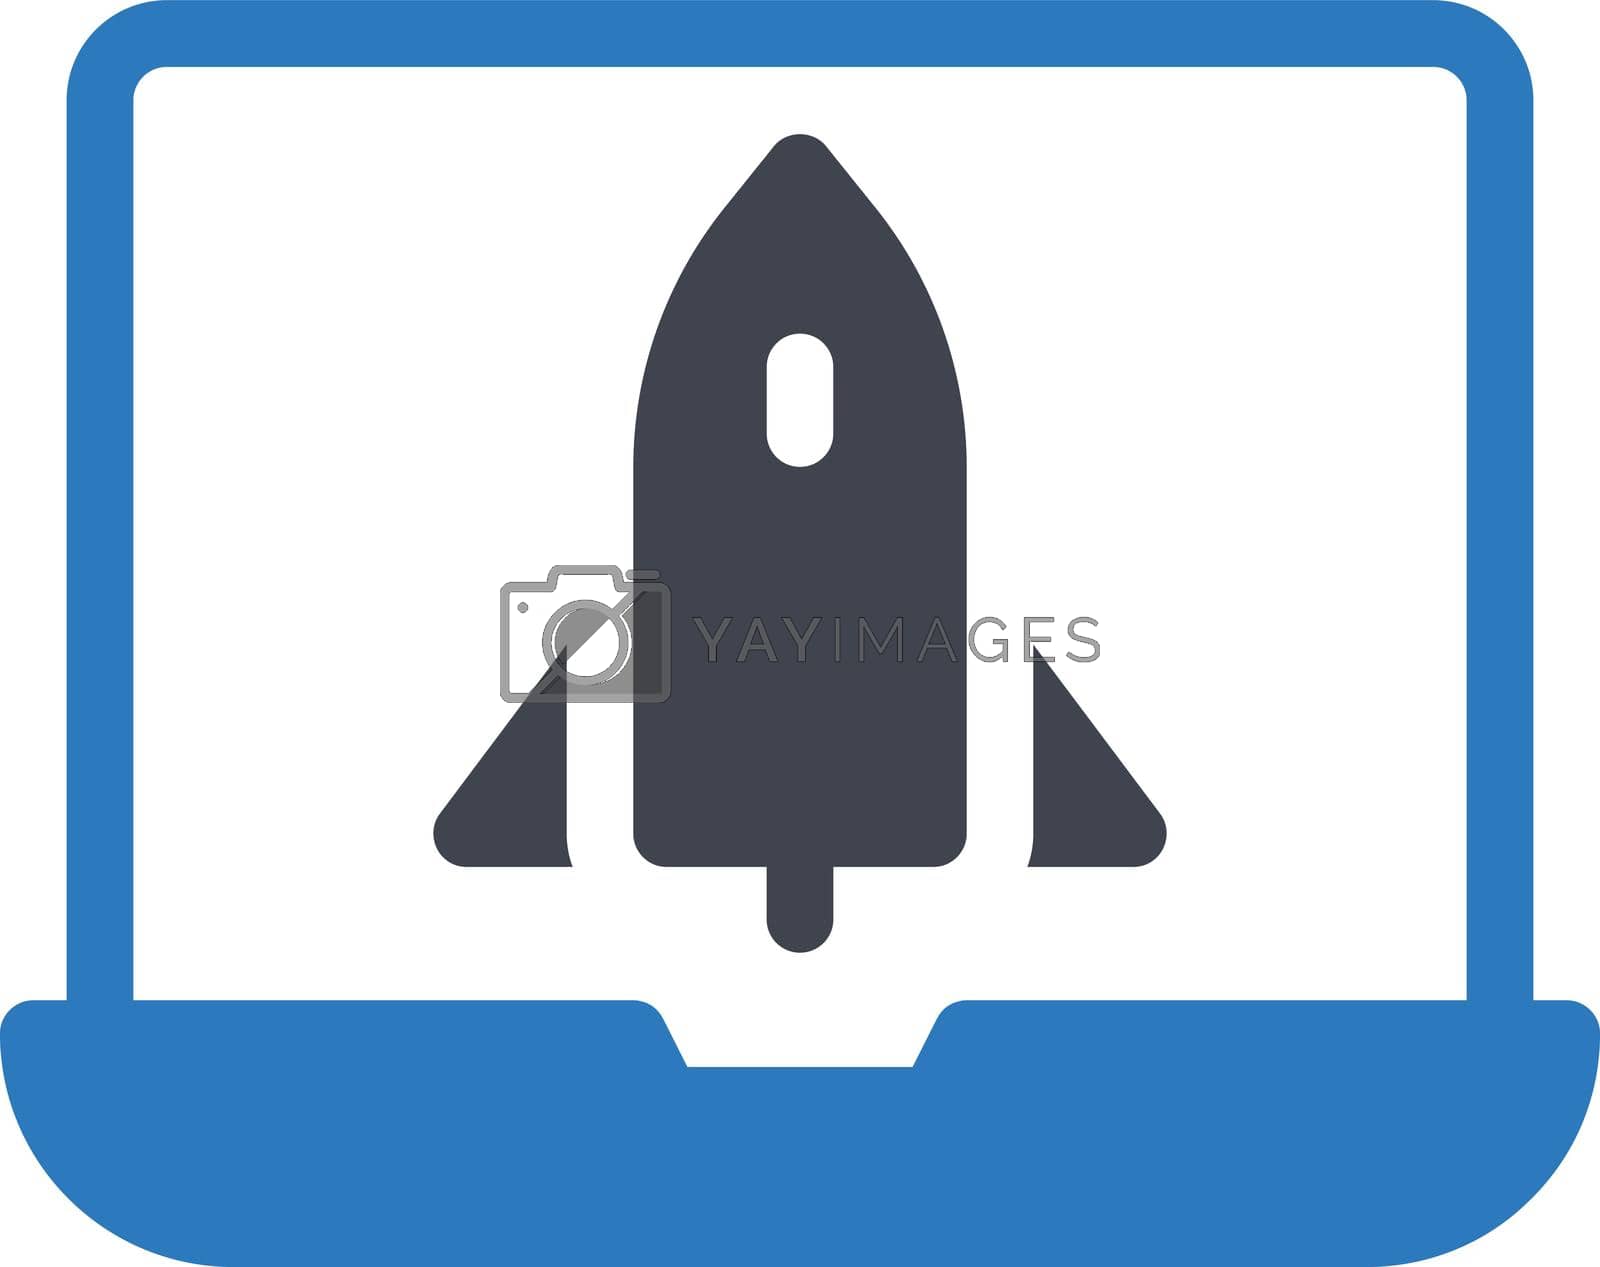 Royalty free image of rocket by FlaticonsDesign